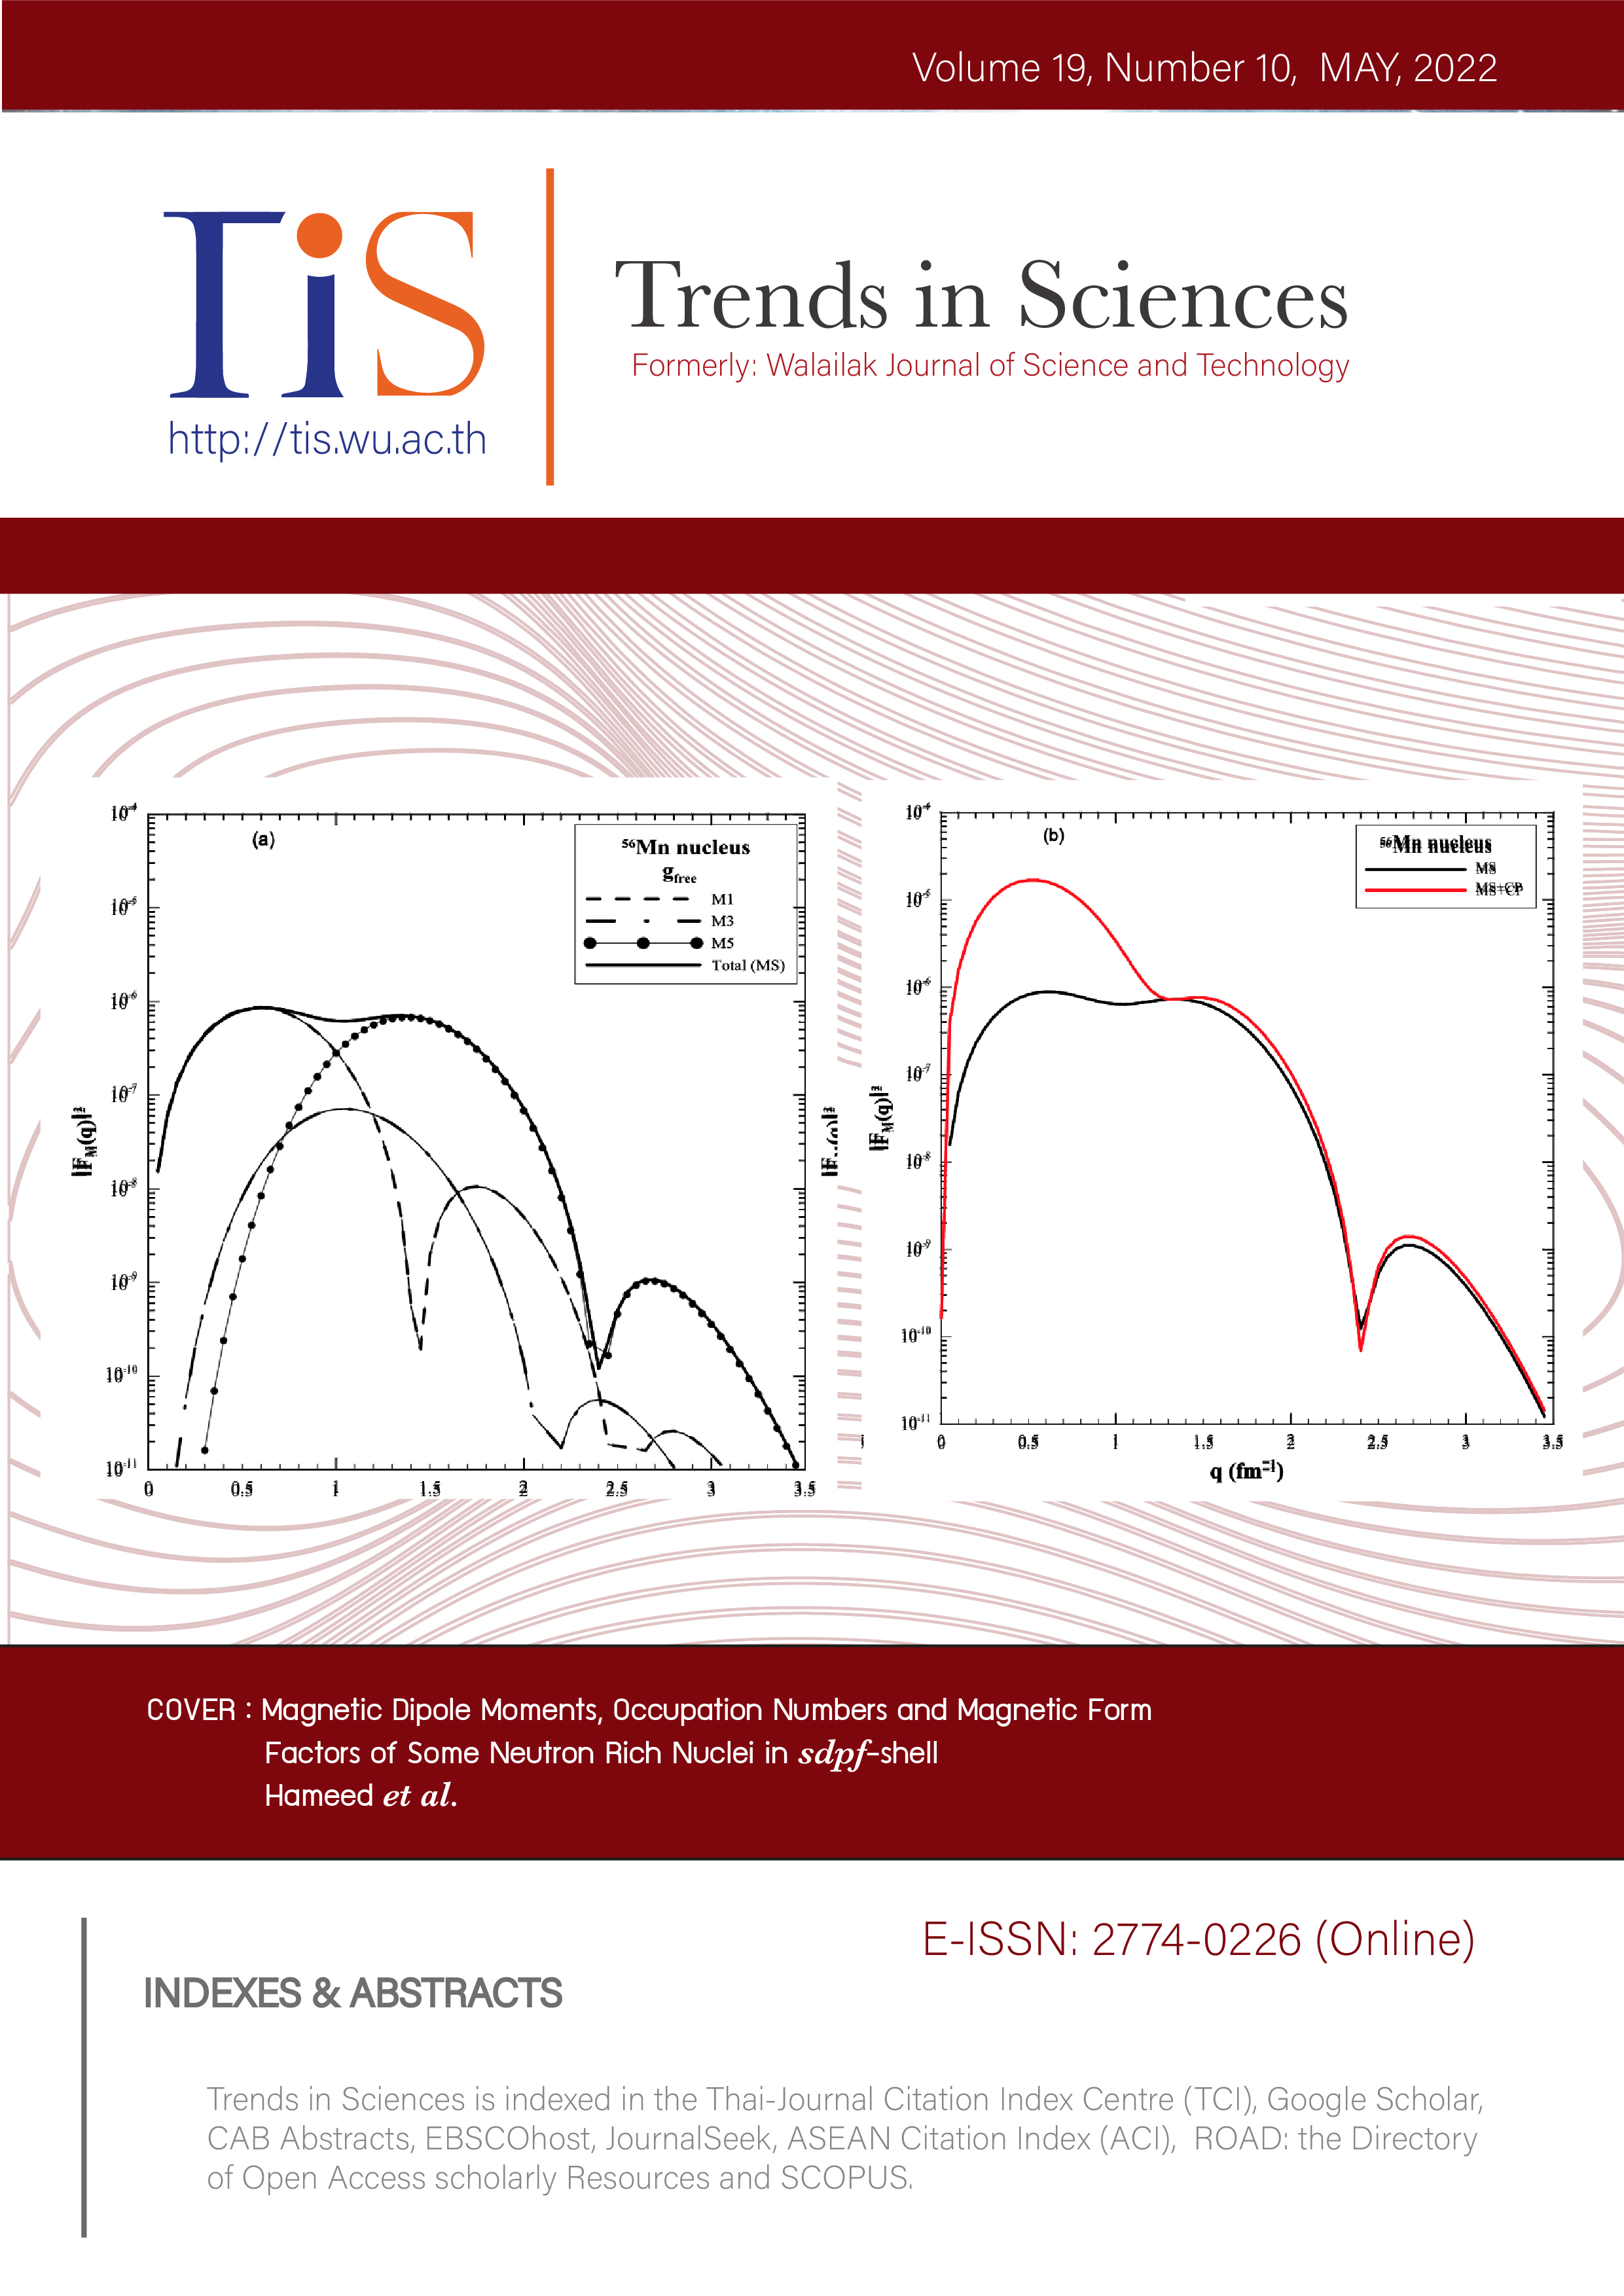 					View Vol. 19 No. 10 (2022): Trends in Sciences, Volume 19, Number 10, 15 May 2022
				